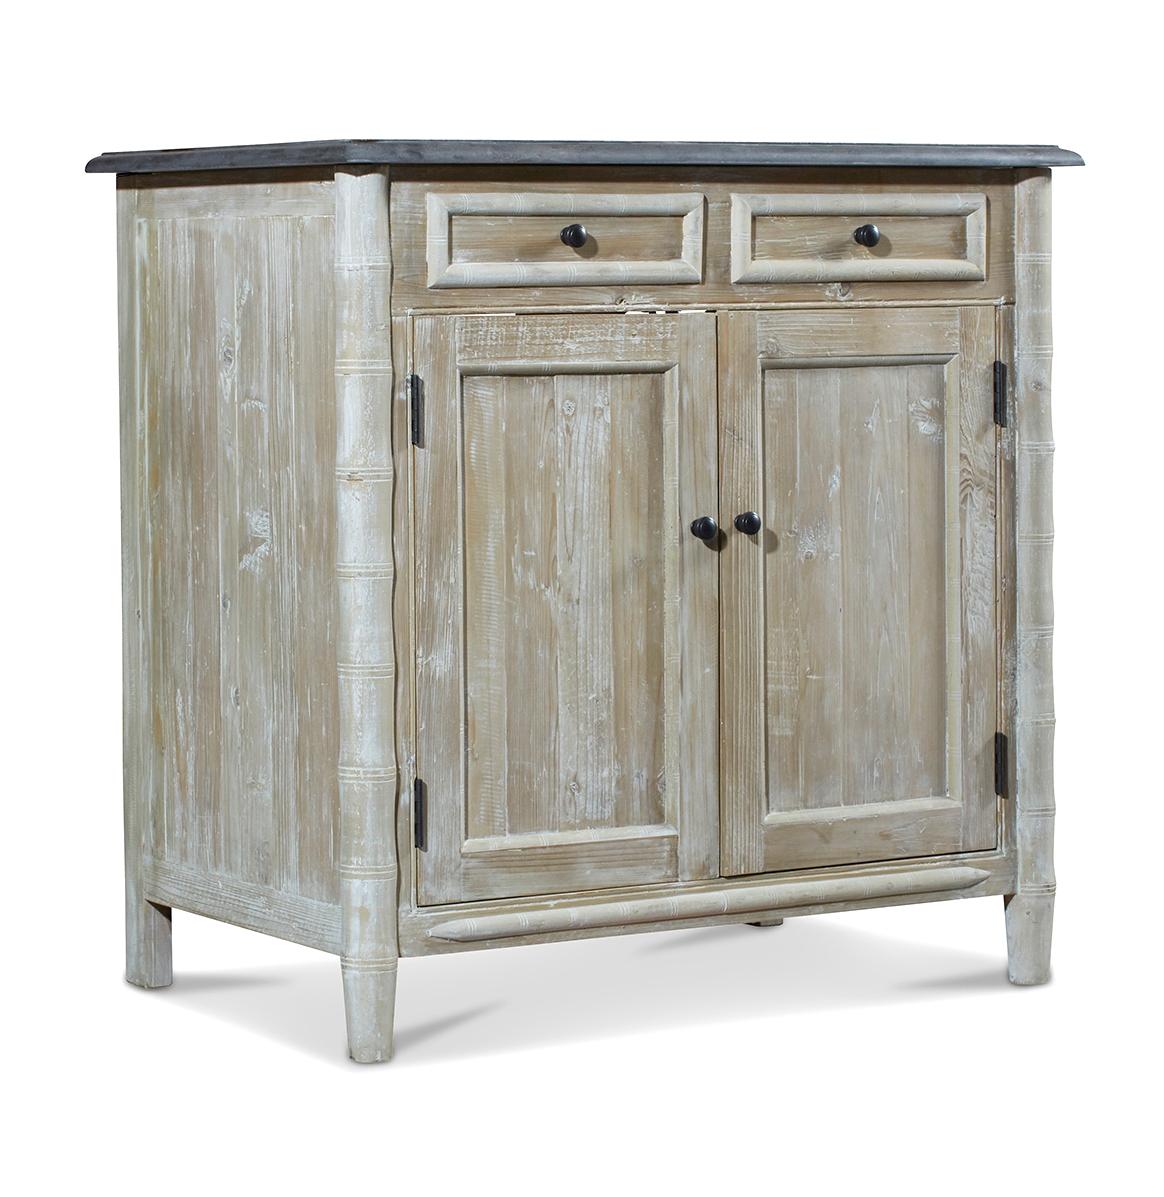 36" Reclaimed Pine Dorset Single Bath Vanity Wash Finish with Natural Blue Stone Top